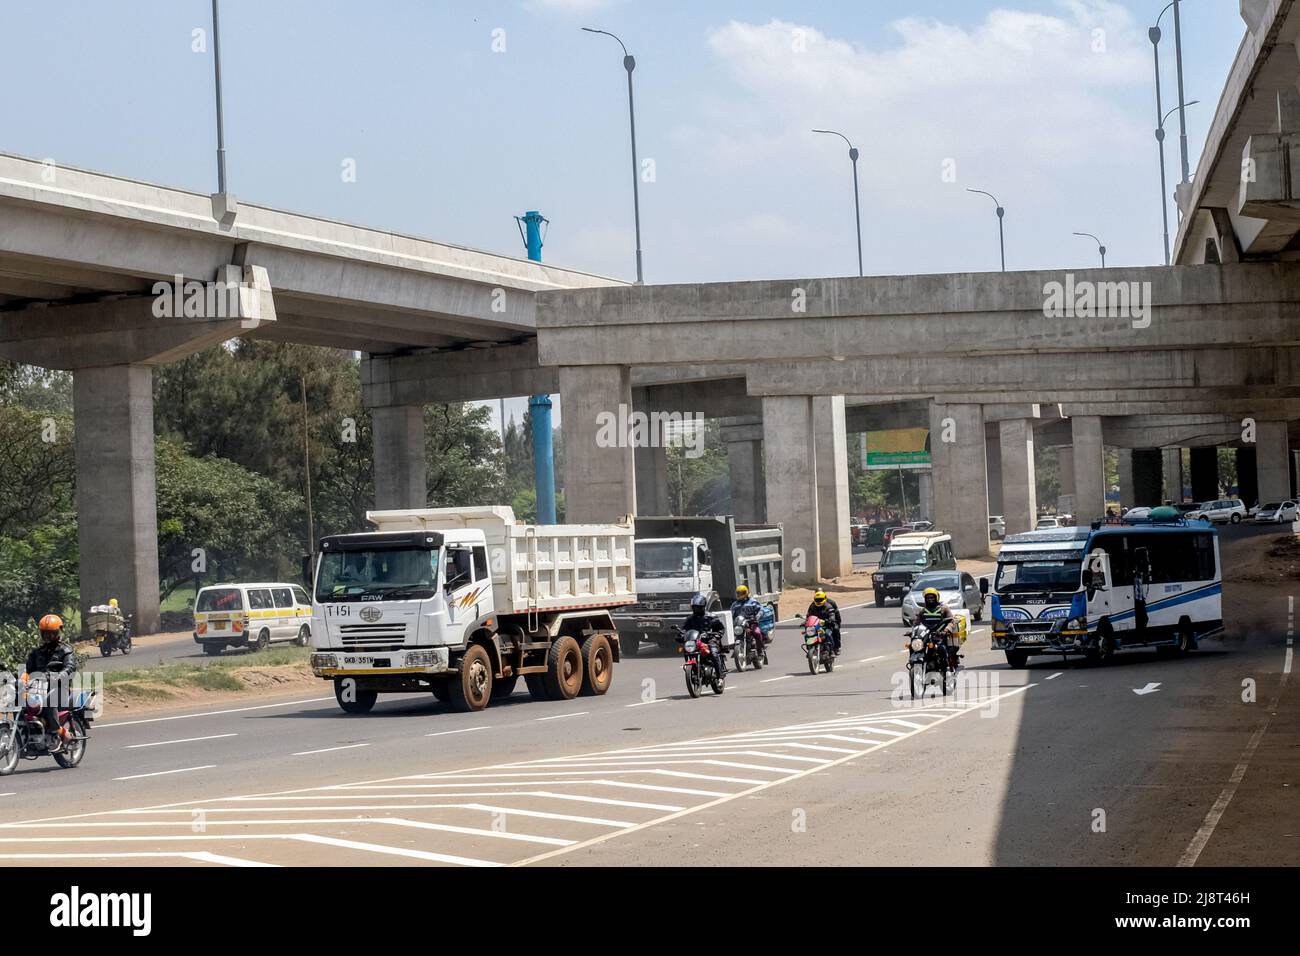 May 14, 2022, Nairobi, Kenya: Motorists drive past the new Nairobi Expressway toll station at Haile Selassie in Nairobi. On 14th May 2022 during the official launching of the Nairobi Expressway, most Kenyan motorists were allowed to use the expressway which will in time reduce the worst traffic congestion cases ever witnessed. Motorists are allowed to either pay through Manual Toll Collection or Electric Toll Collection in order to drive through the road. The road will be operated by Moja Expressway, a subsidiary of China Road and Bridge Corporation for the next 27 years. (Credit Image: © Donw Stock Photo